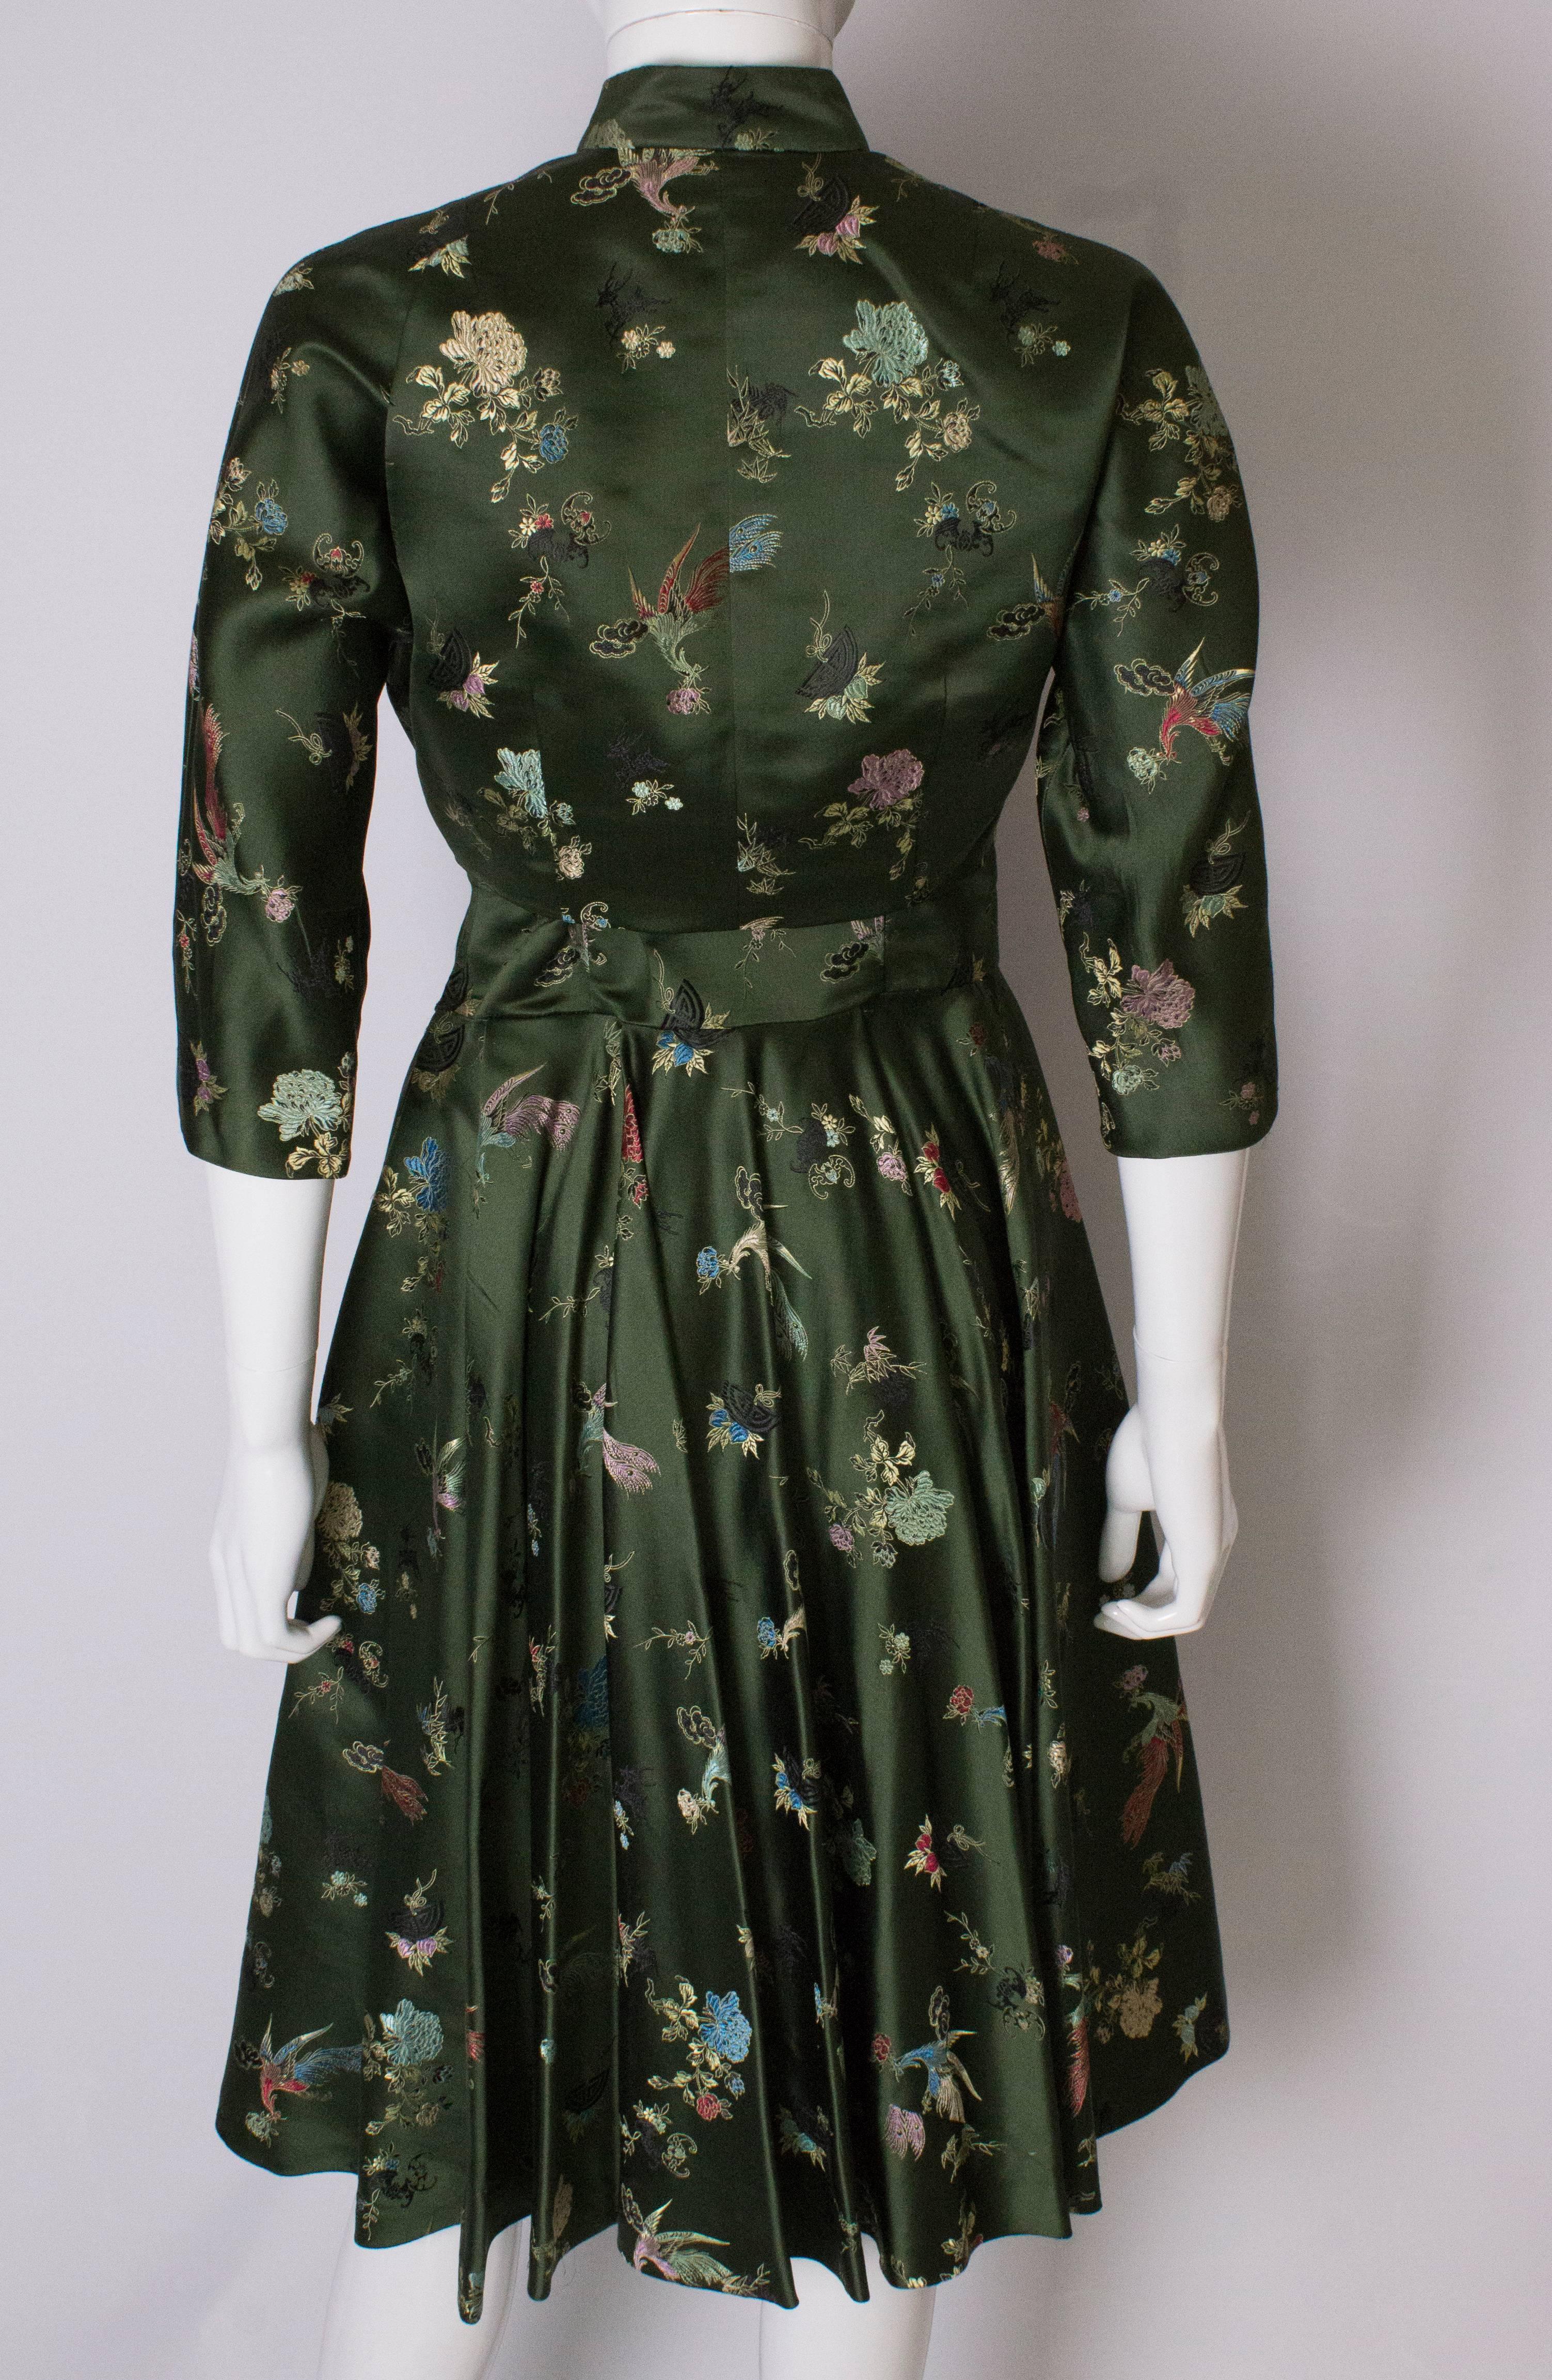 A Vintage 1950s Green Dress and Bolero Jacket by Butterick  For Sale 2